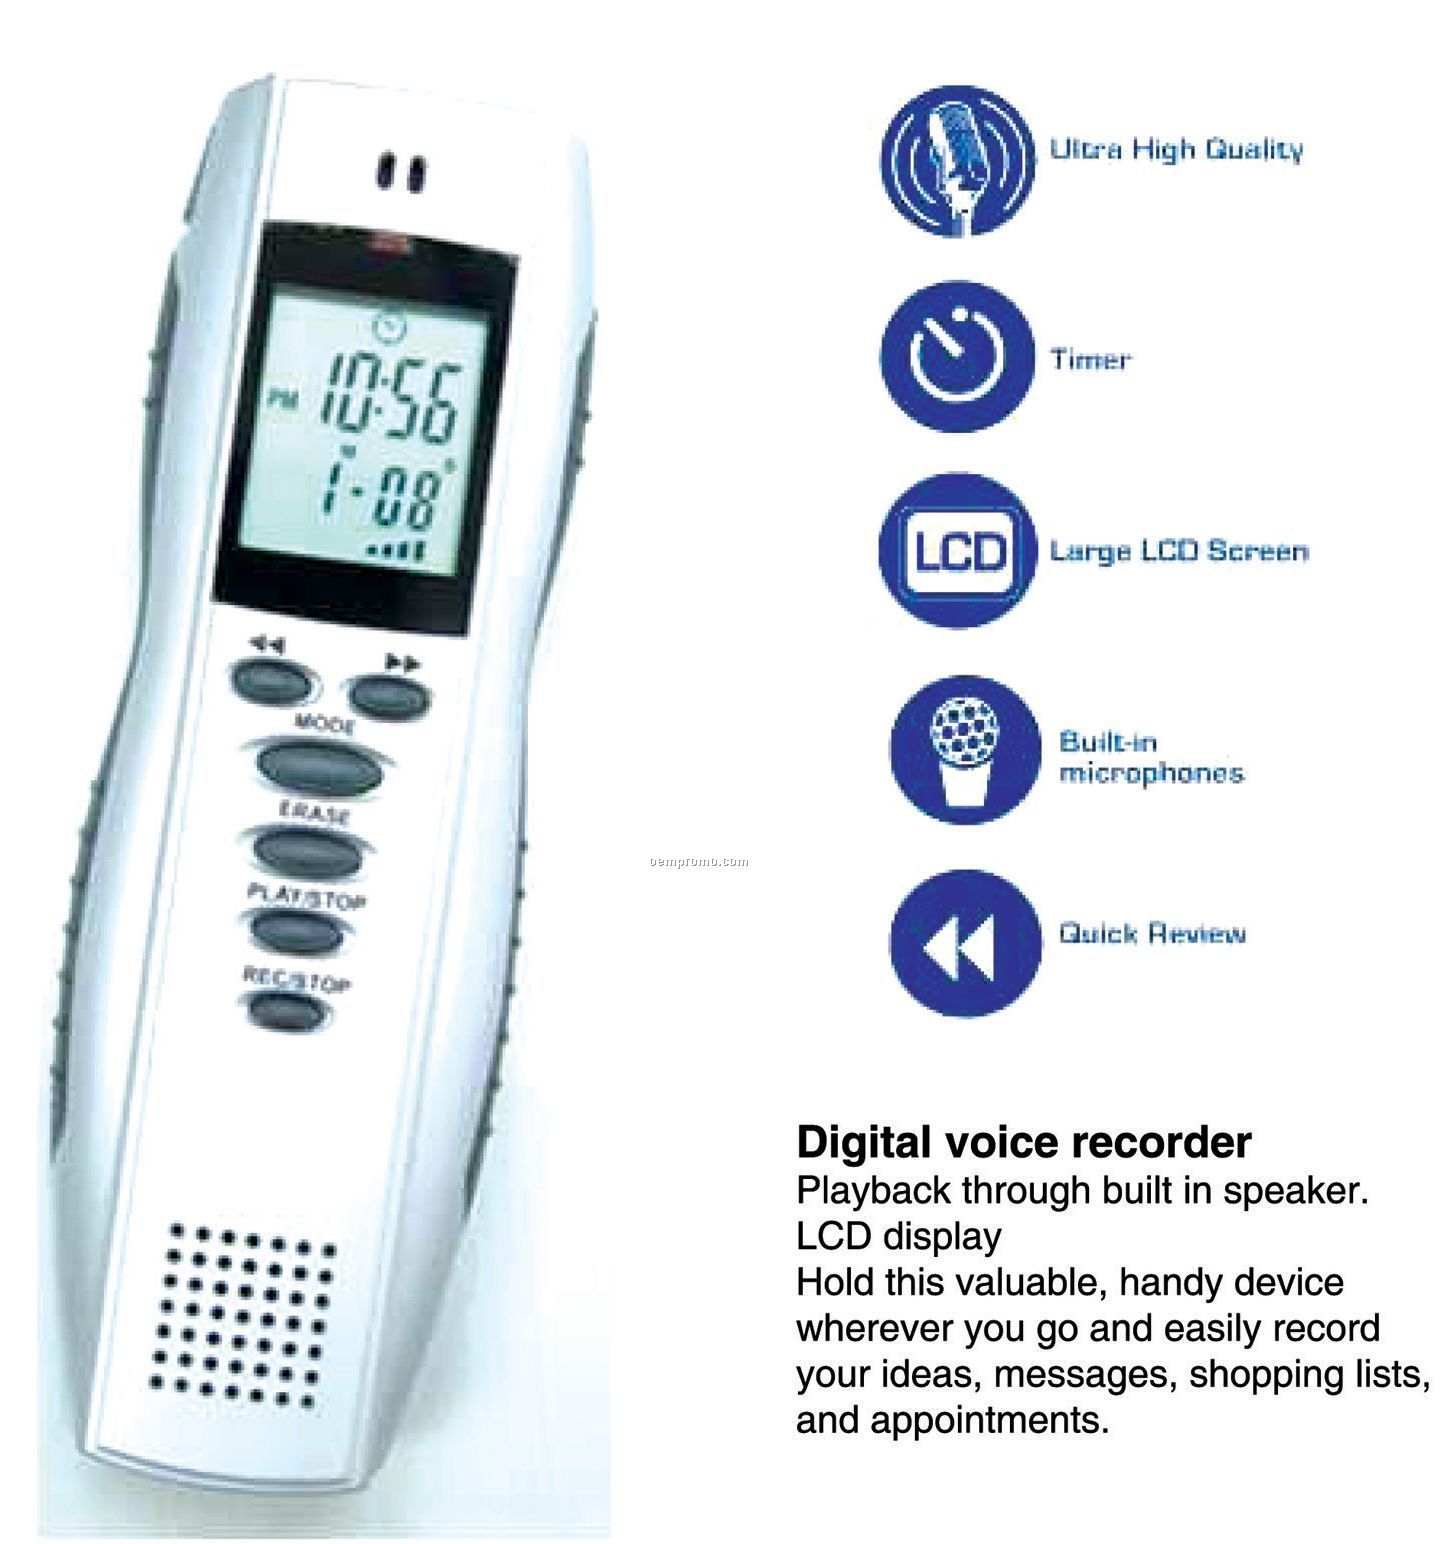 conference recorder 2